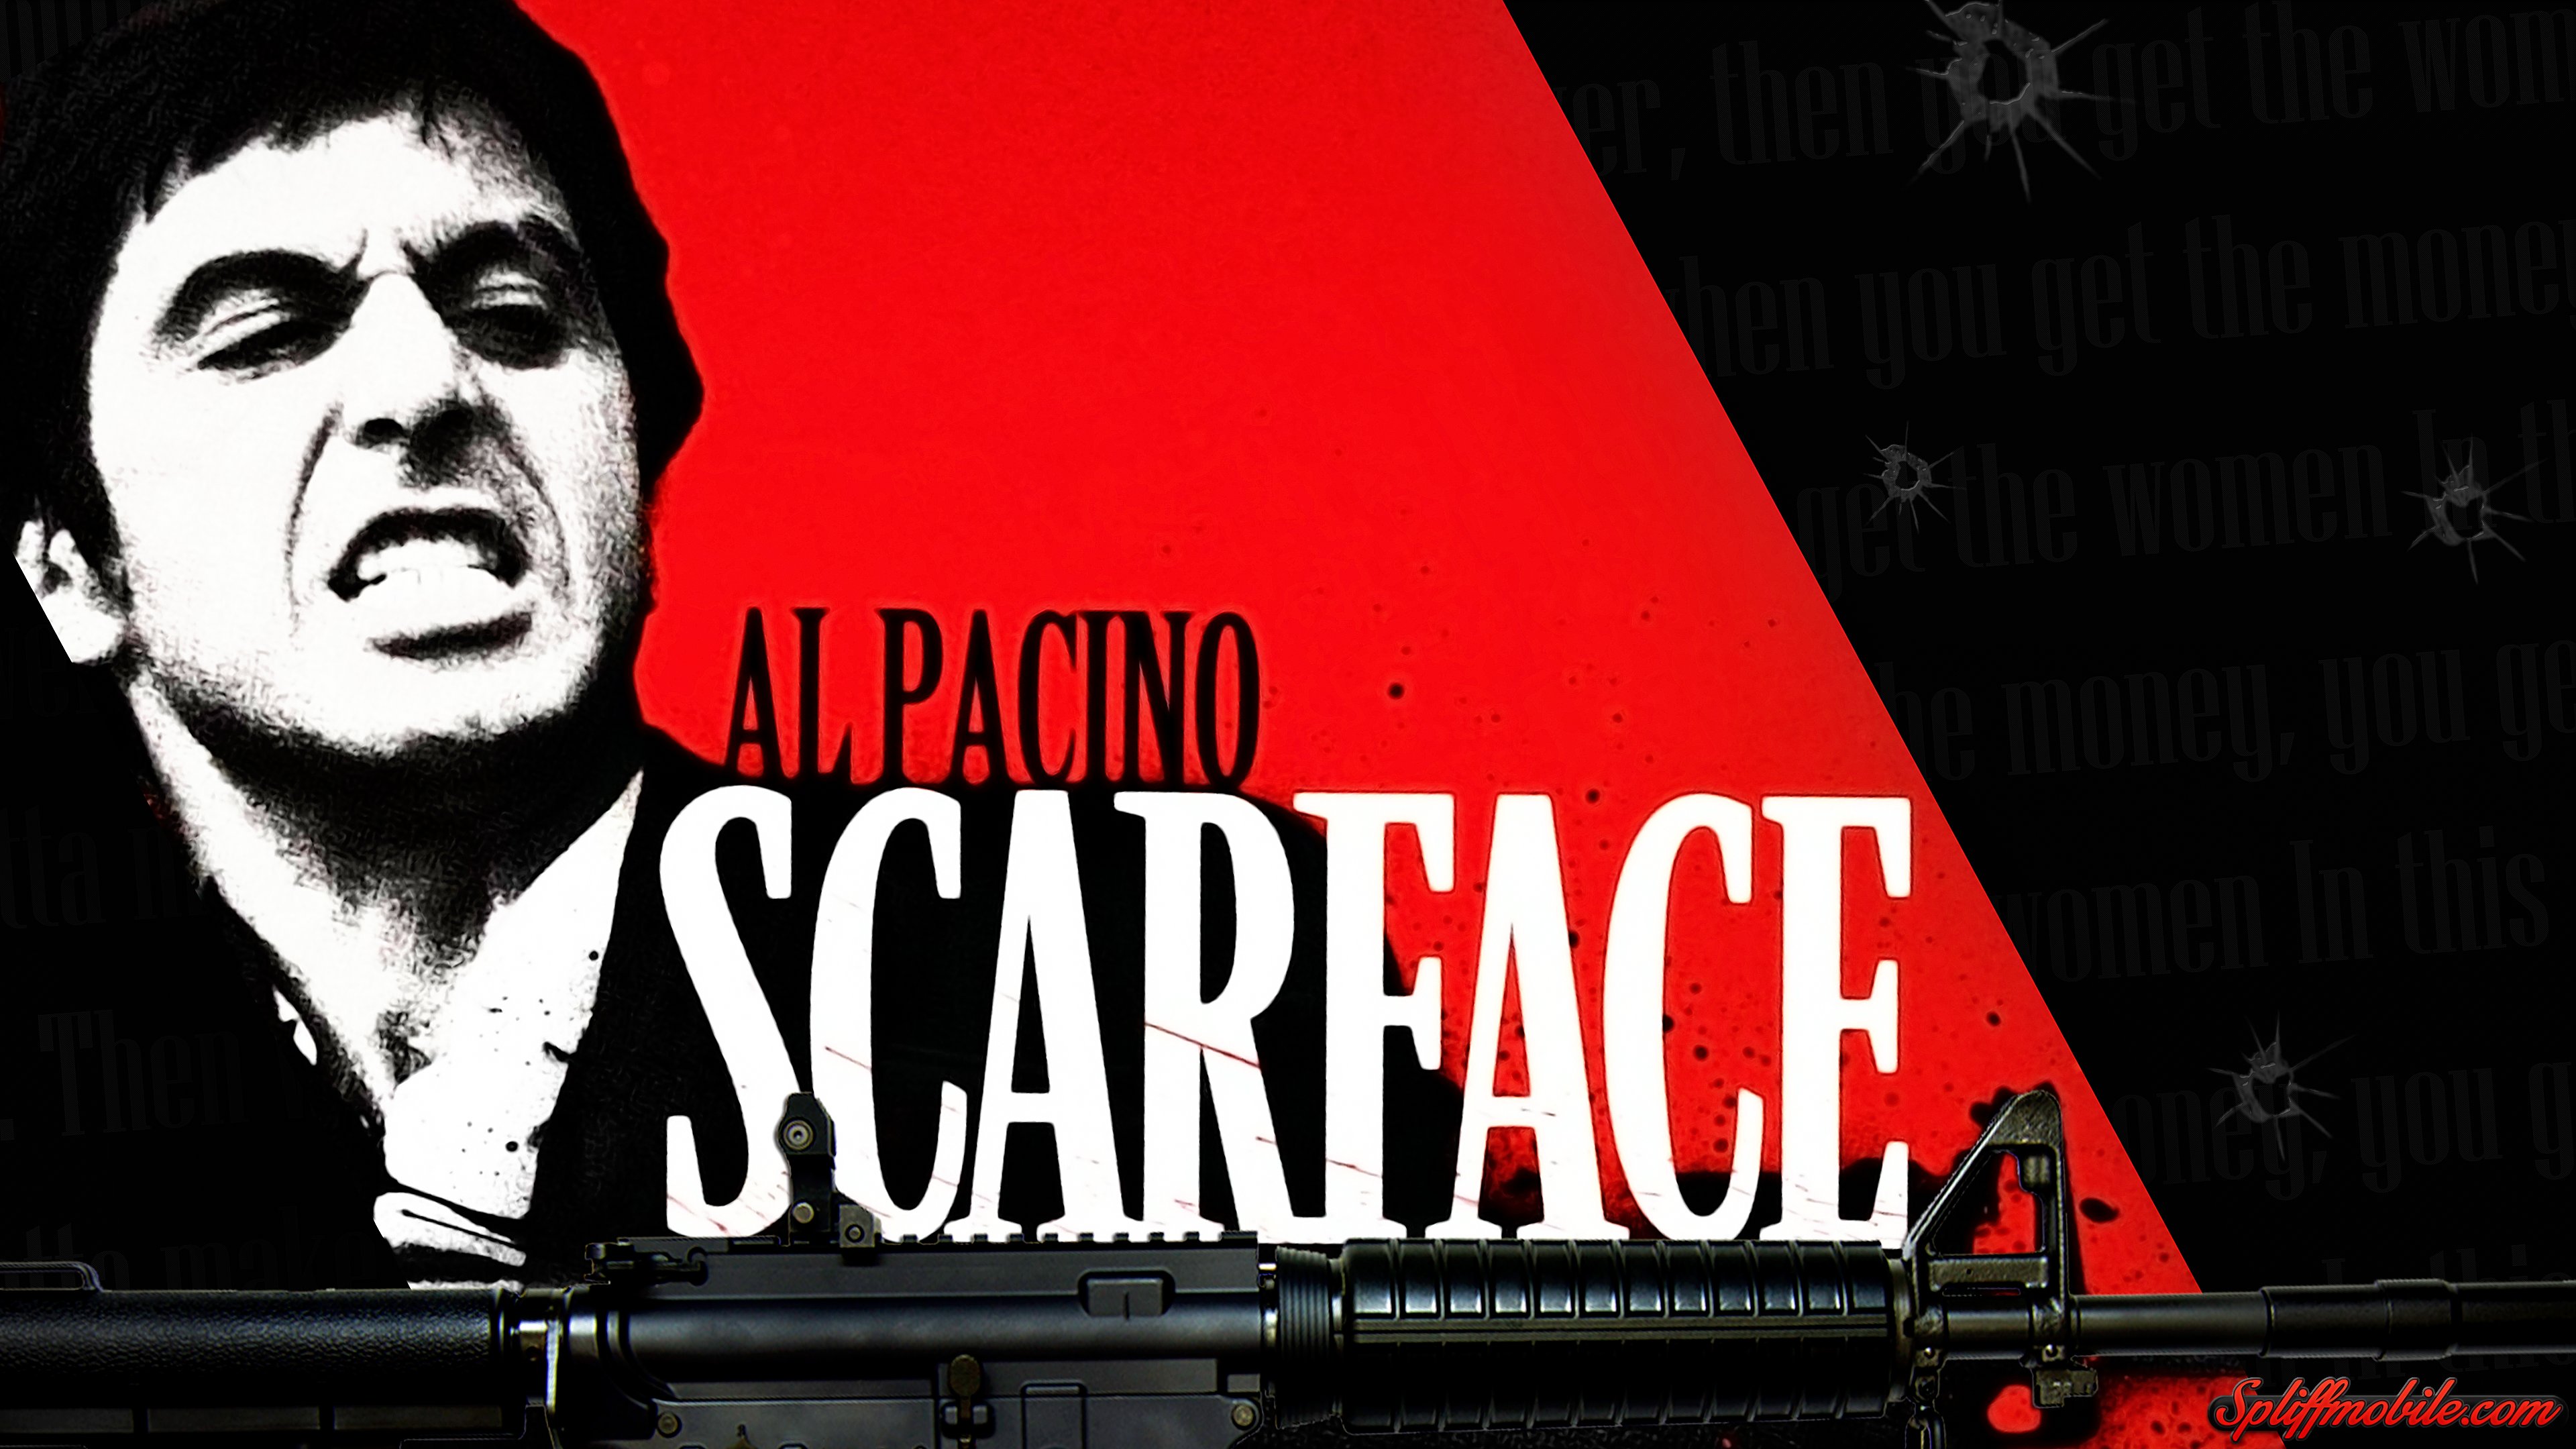 scarface free game download pc